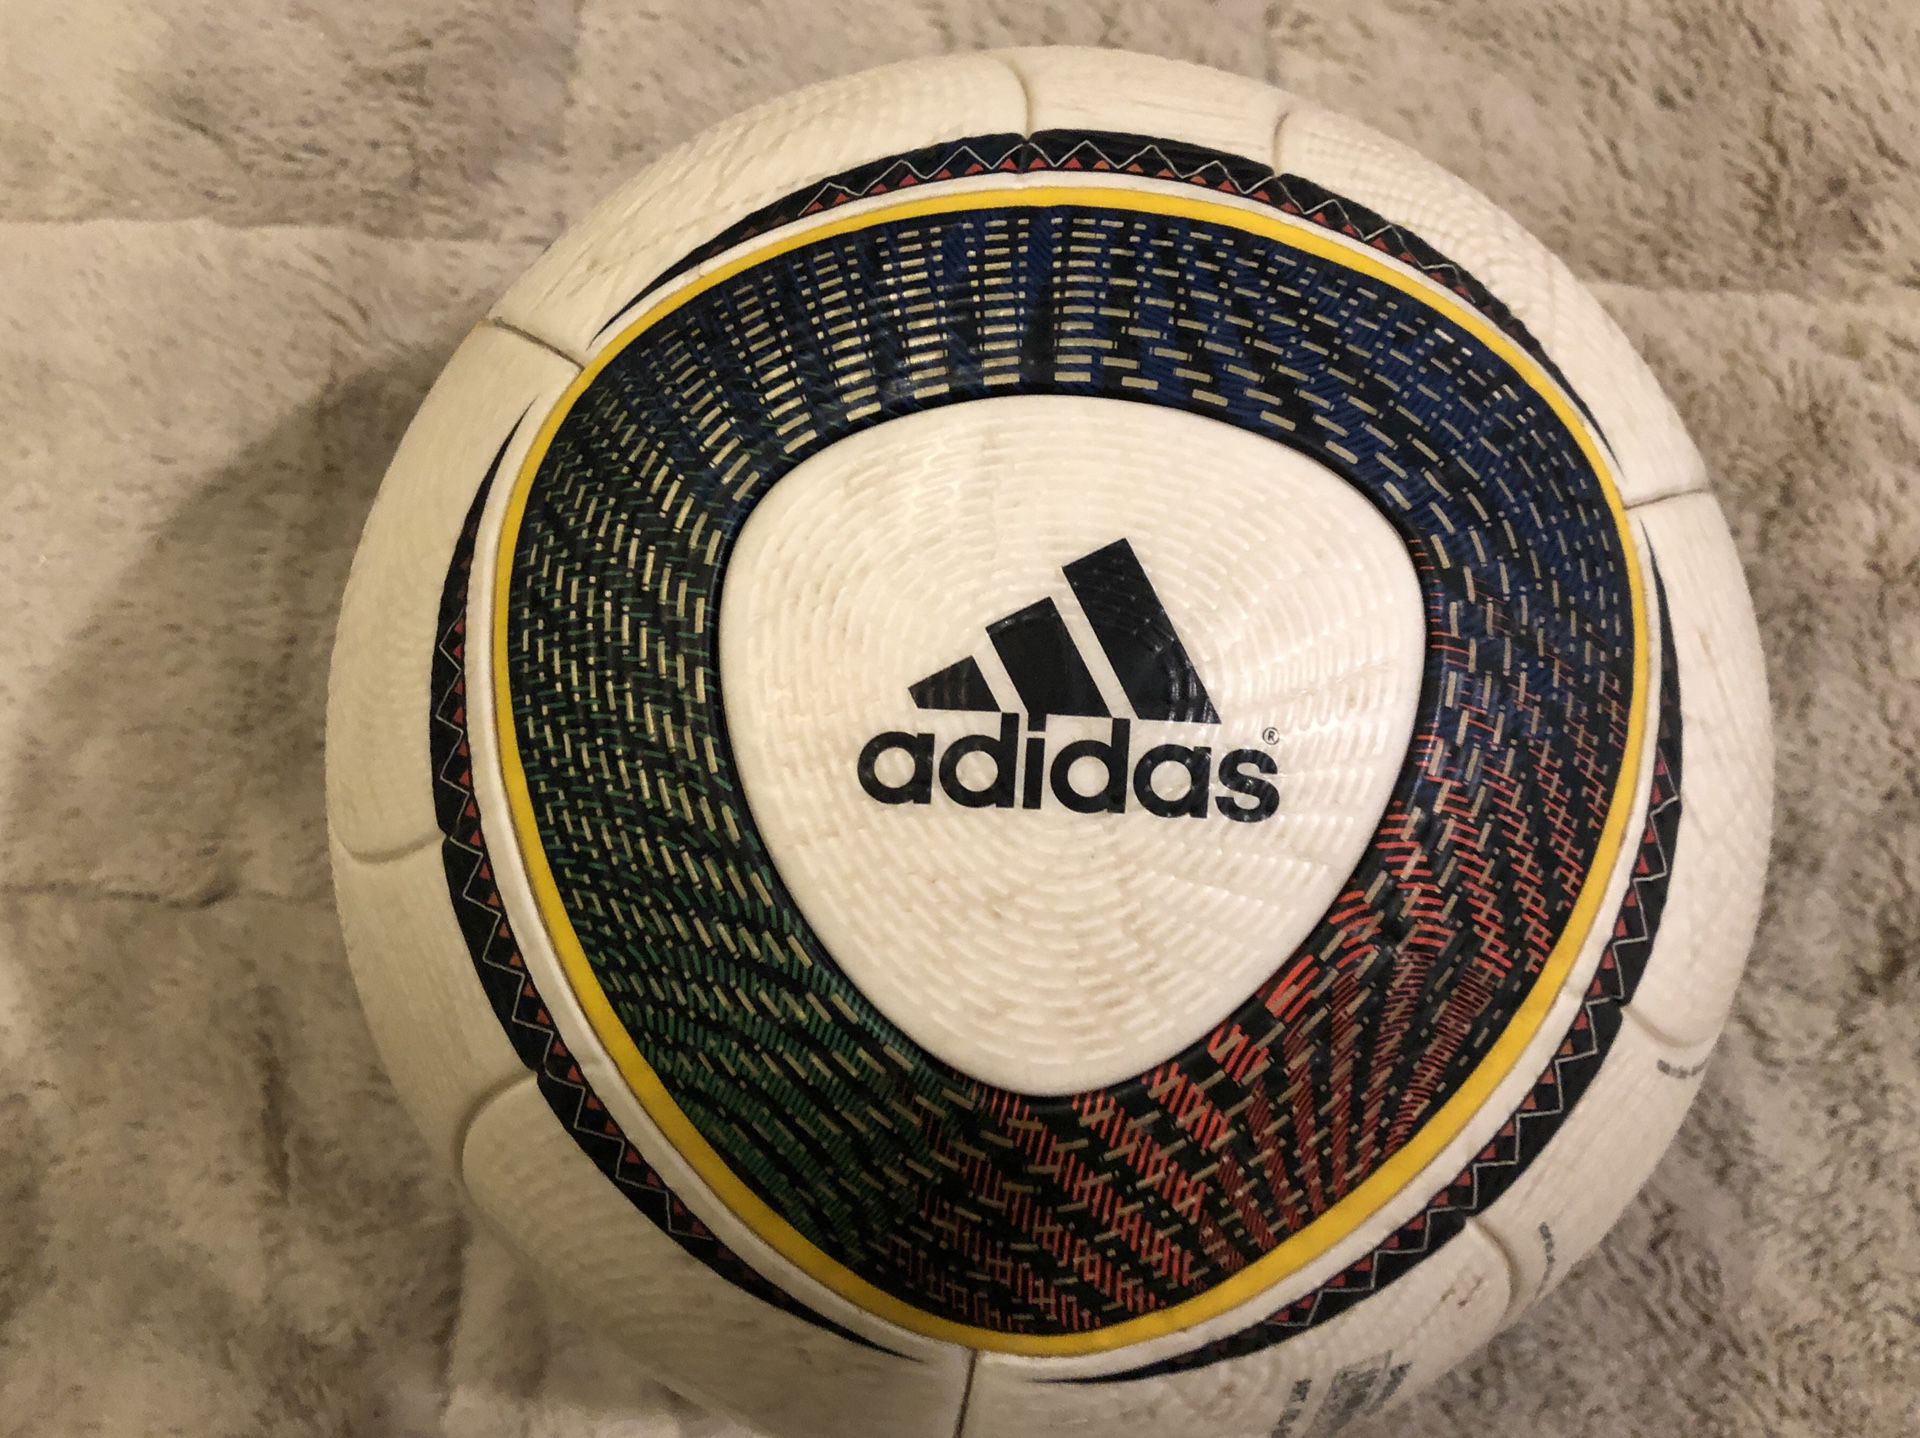 Disgusto Igualmente cumpleaños Adidas Jabulani Official Match Ball 2010 FIFA World Cup Soccer Ball for  Sale in Reno, NV - OfferUp